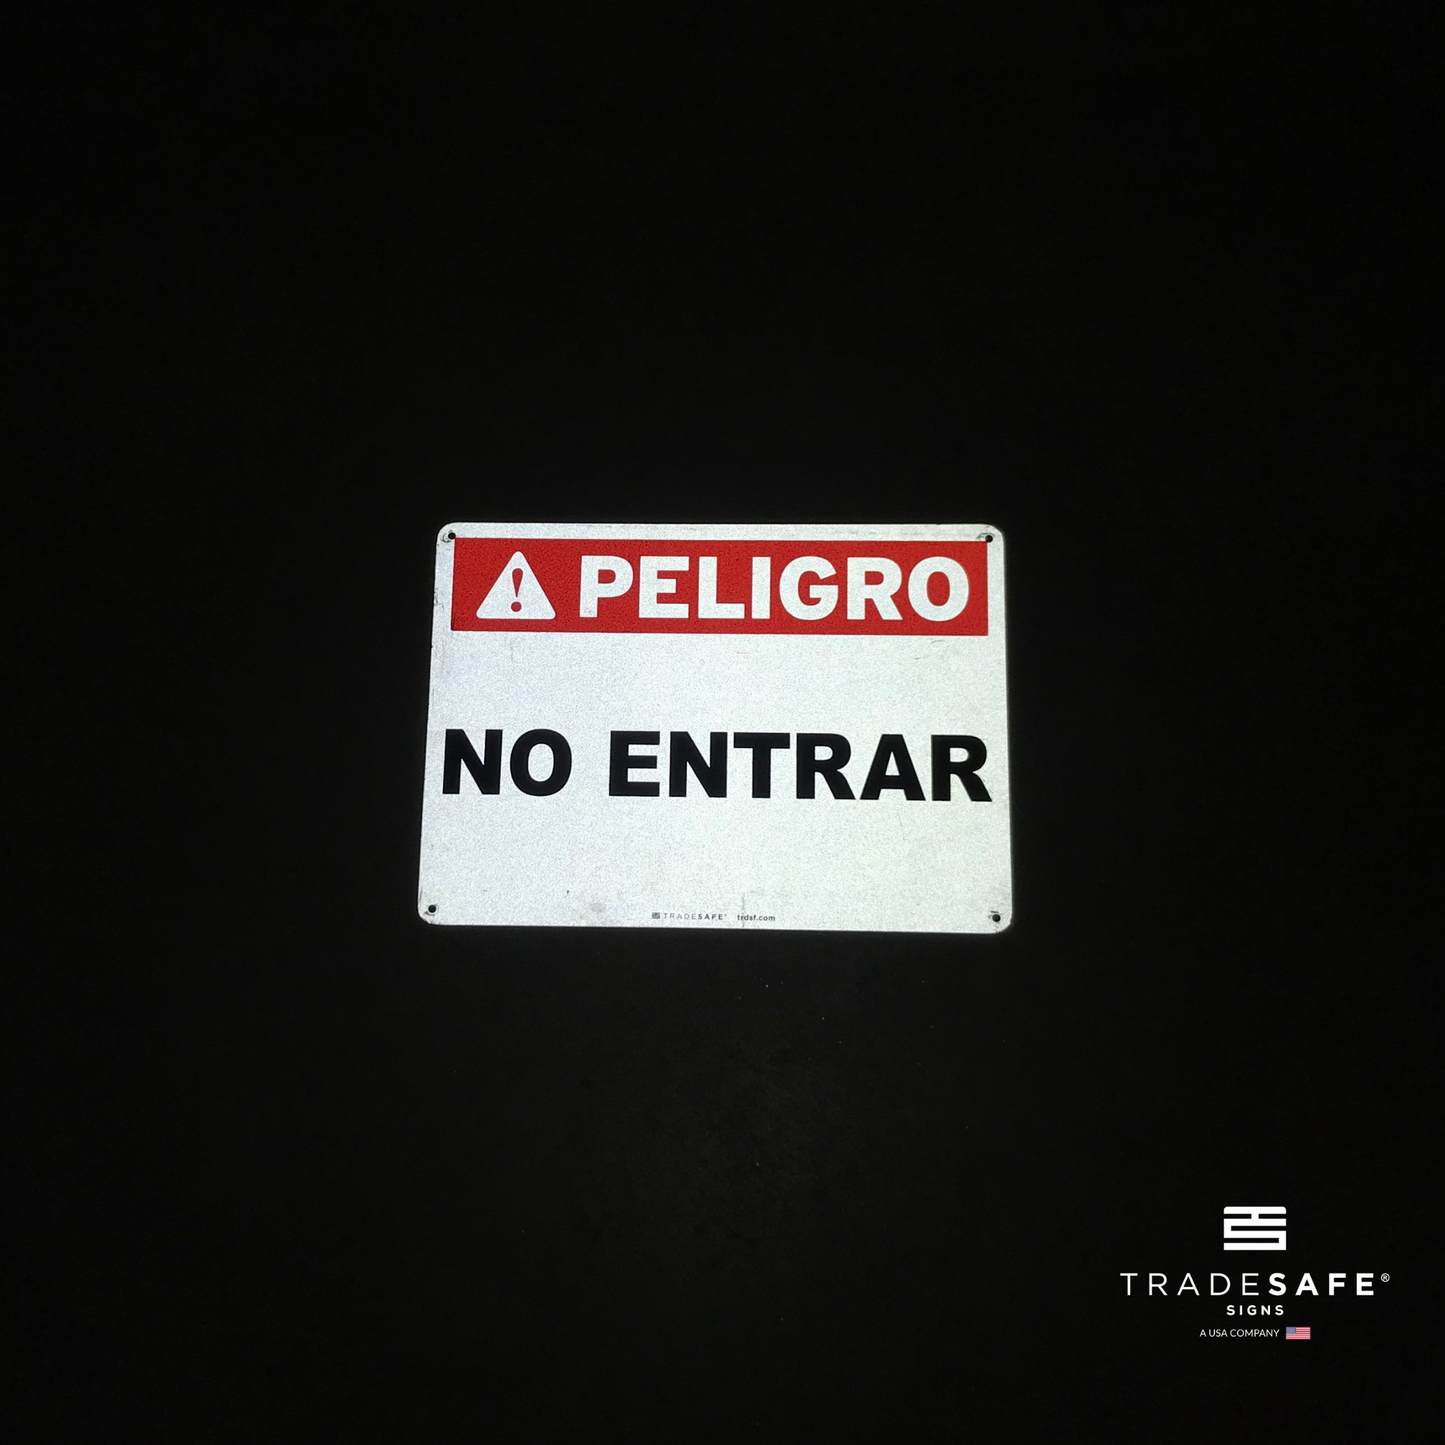 reflective attribute of peligro sign on black background